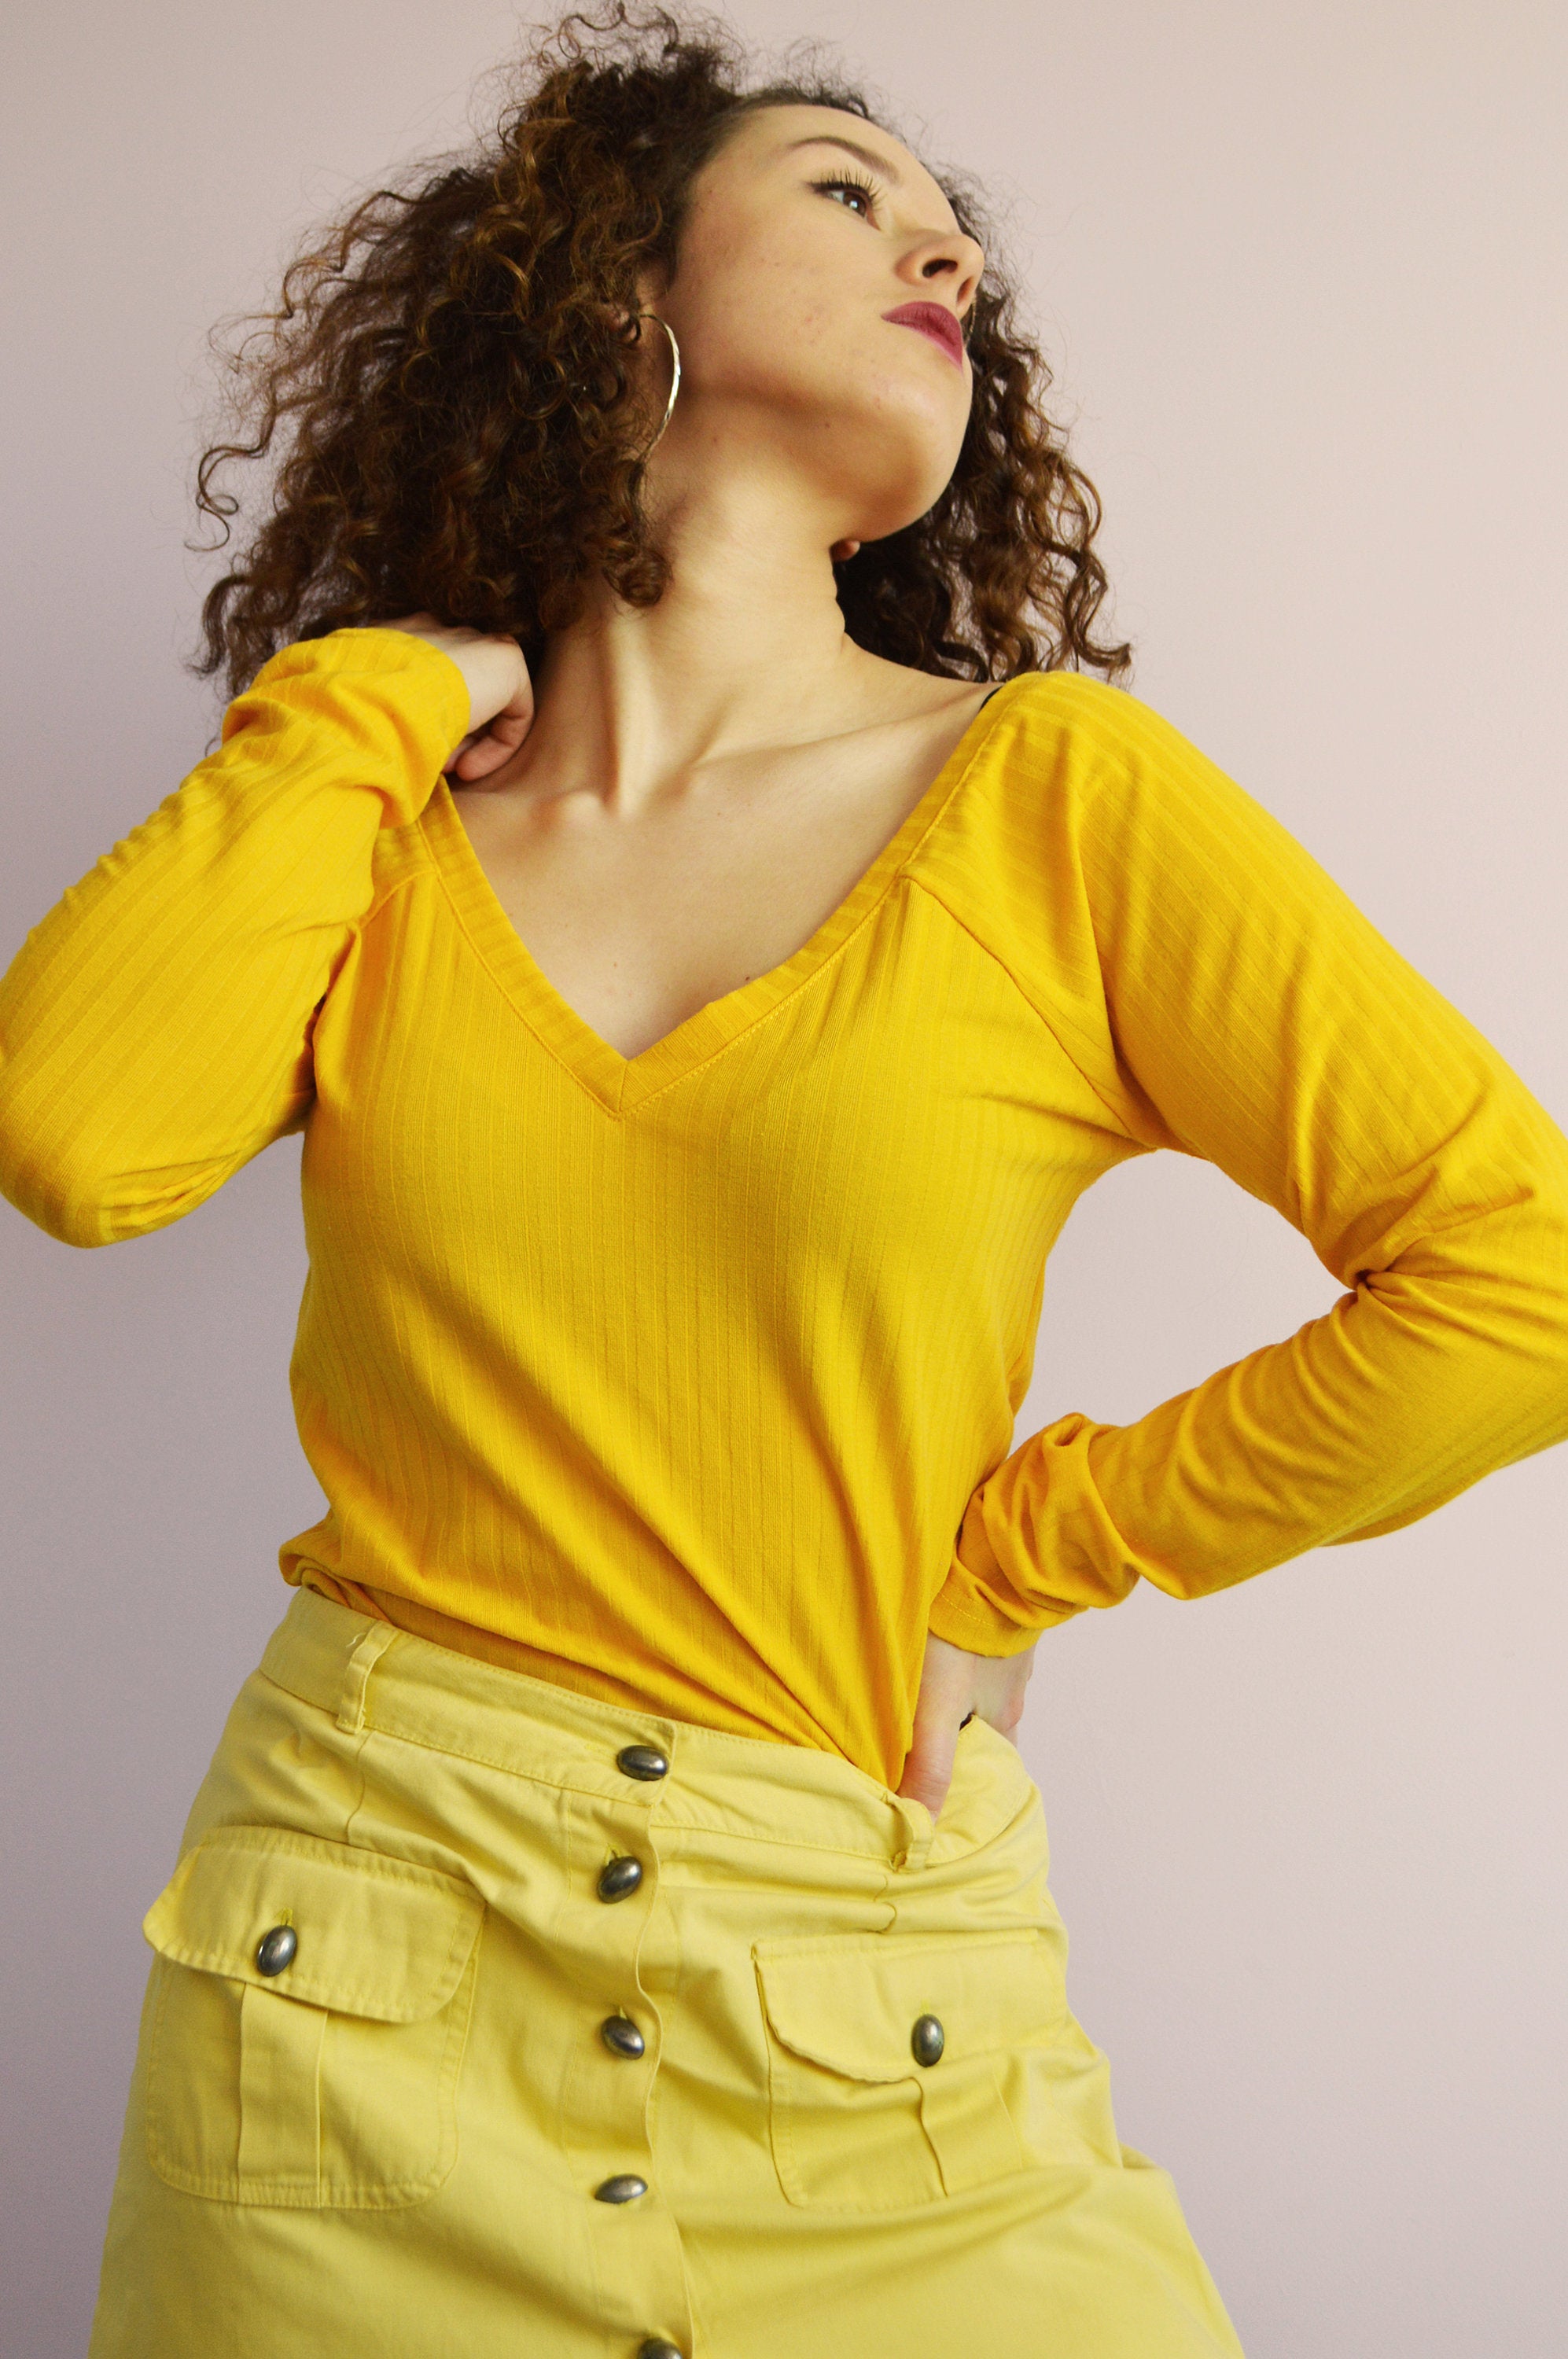 Vintage 90s ribbed knit minimalist yellow top